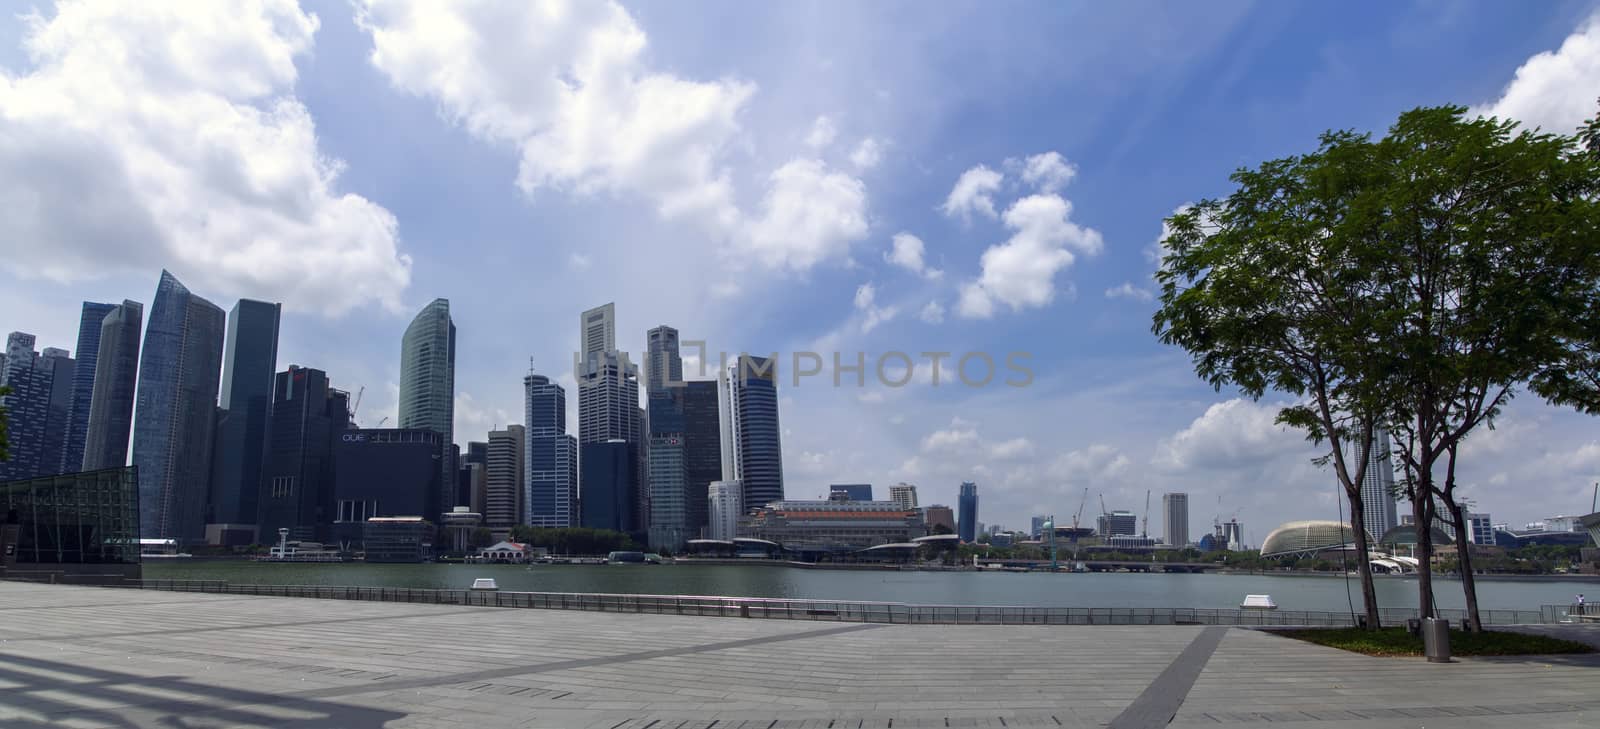 Marina Bay Panorama. Afternoon in City  EDITORIAL Singapore, Singapore - February 13, 2014